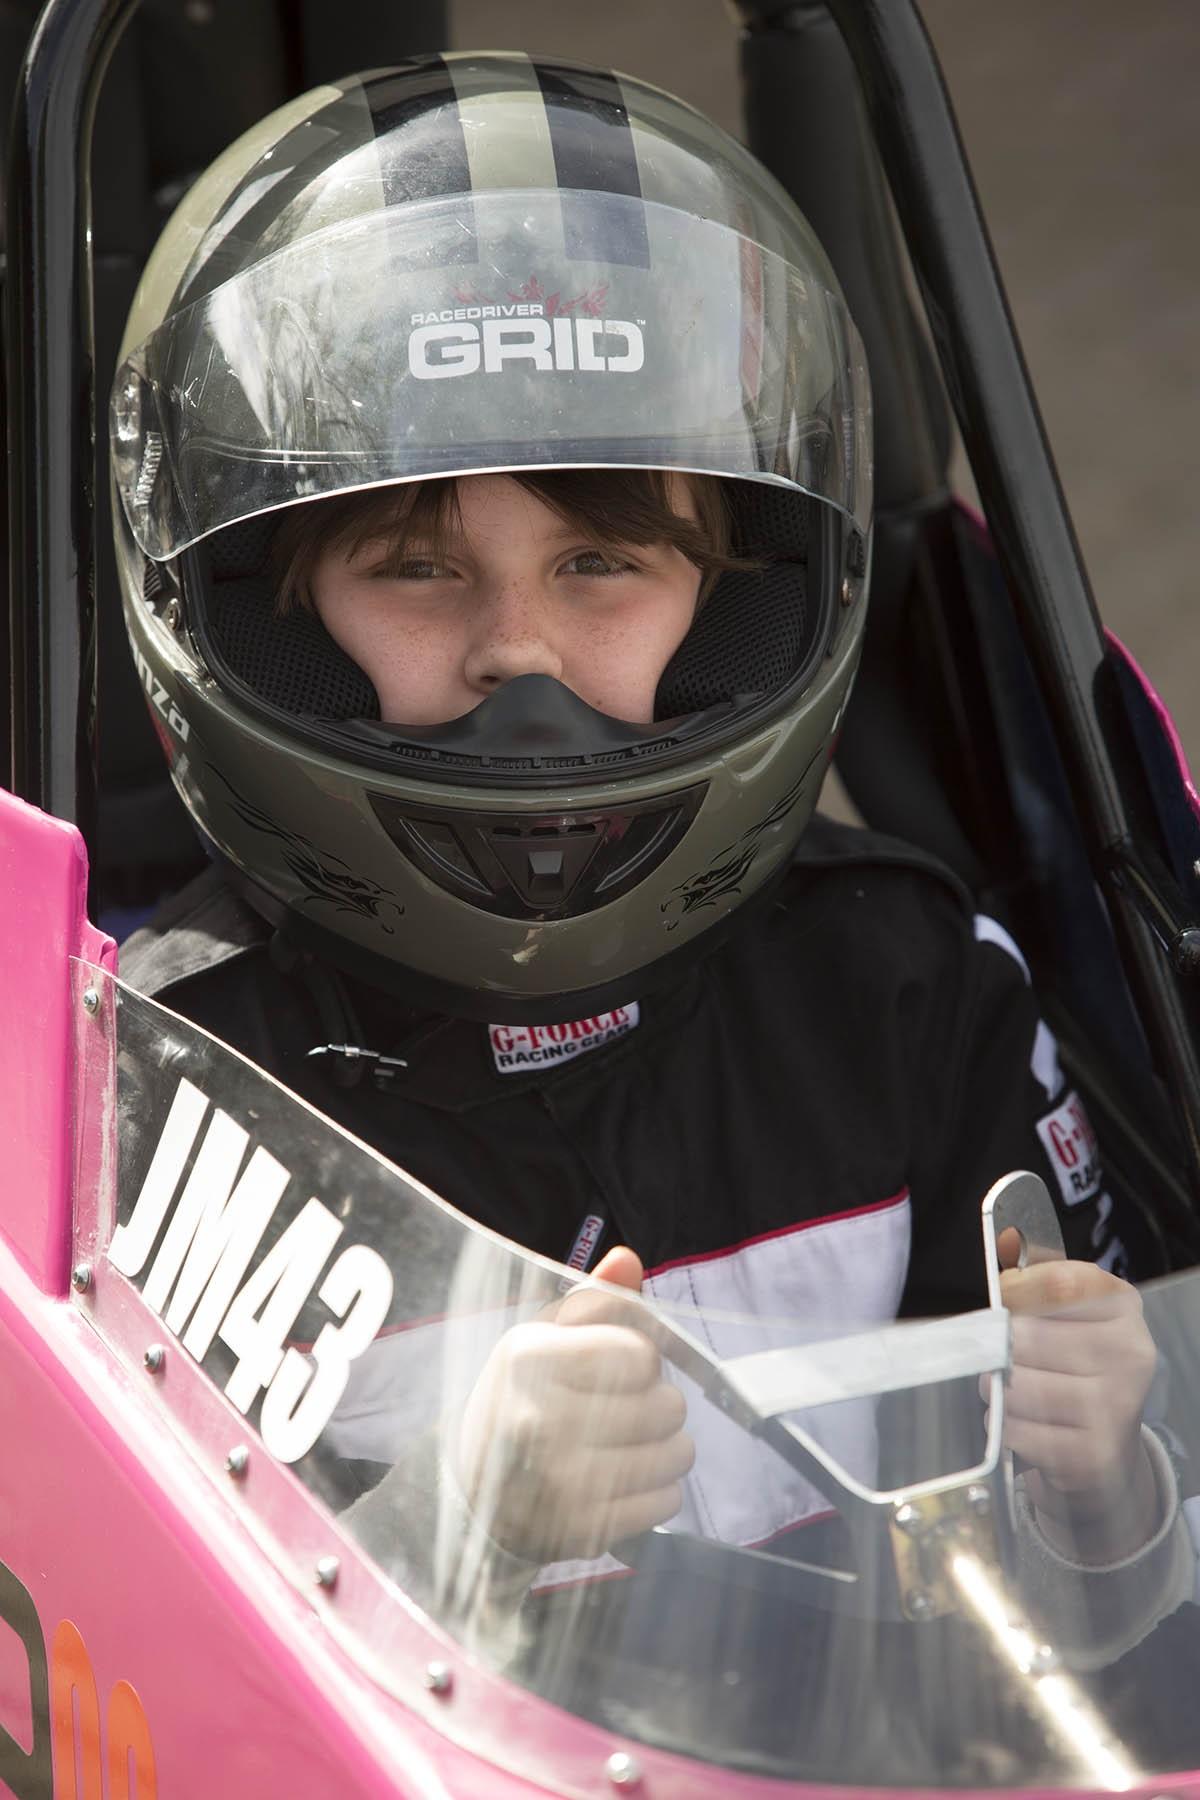 Drag racer hopes to become fastest ten-year-old girl in the country - 3690167